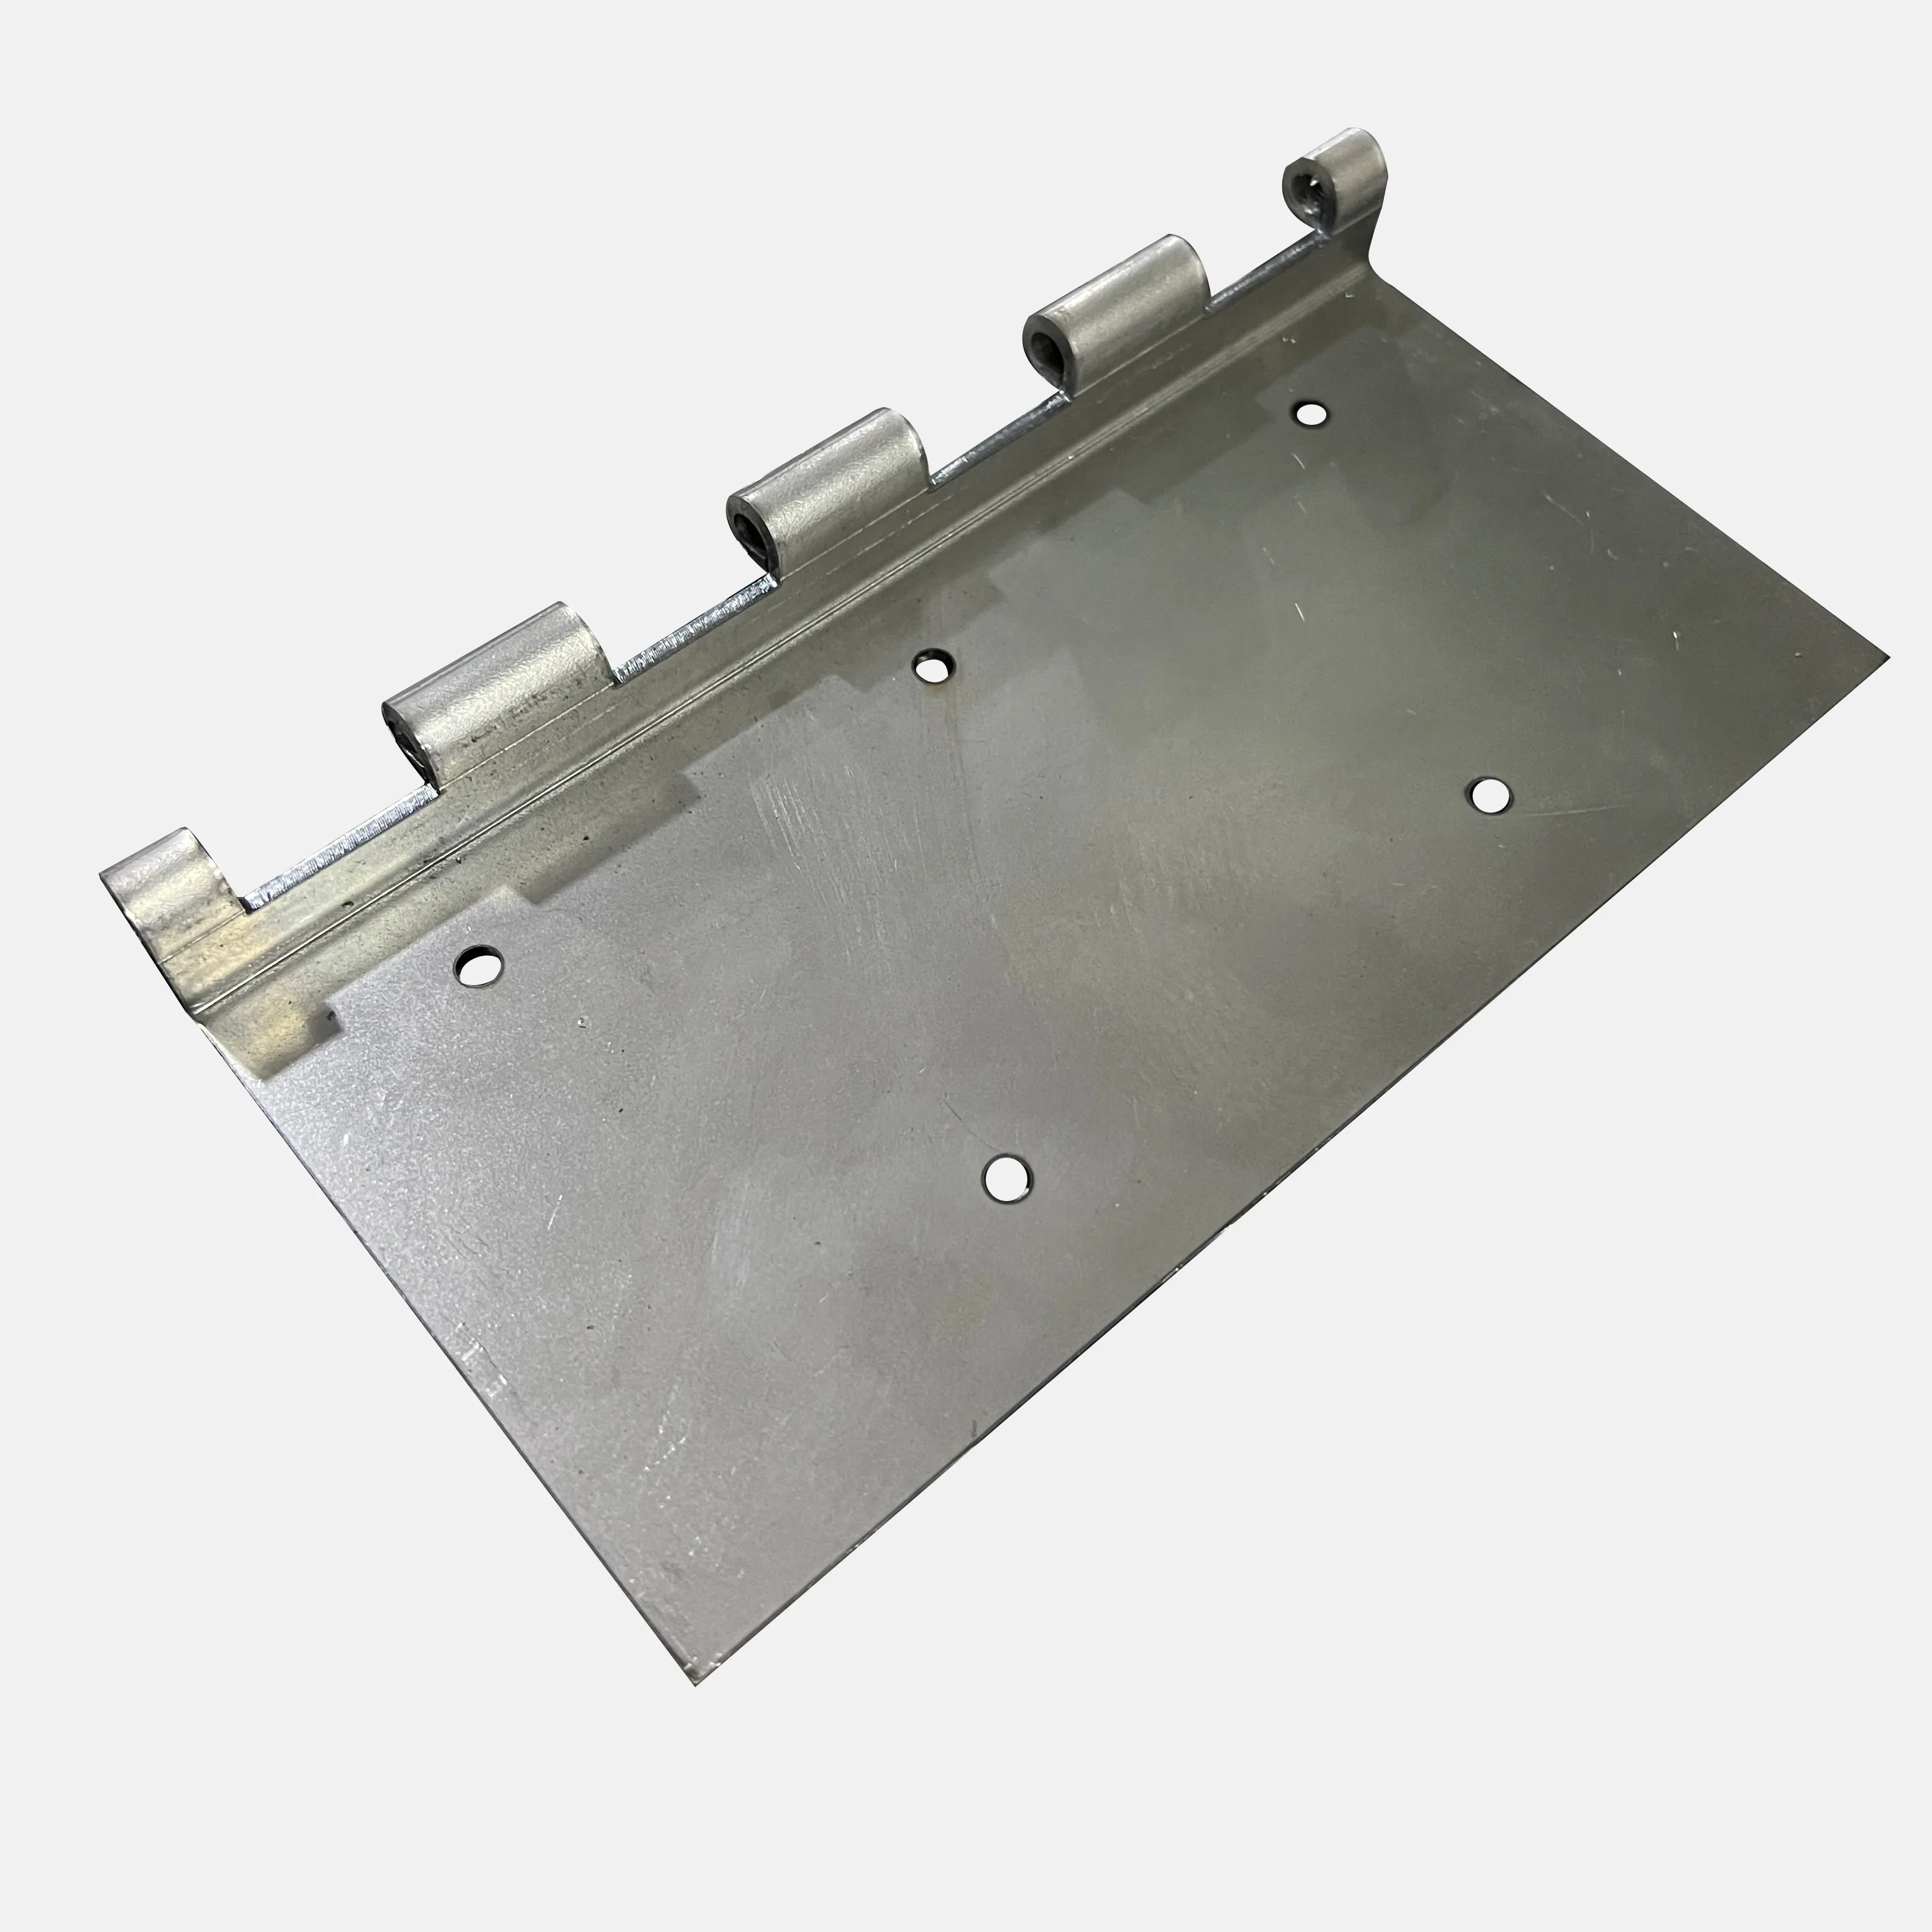 Stainless steel aluminum sheet metal fabrication forming laser cut product pipe bending service stamped metal parts